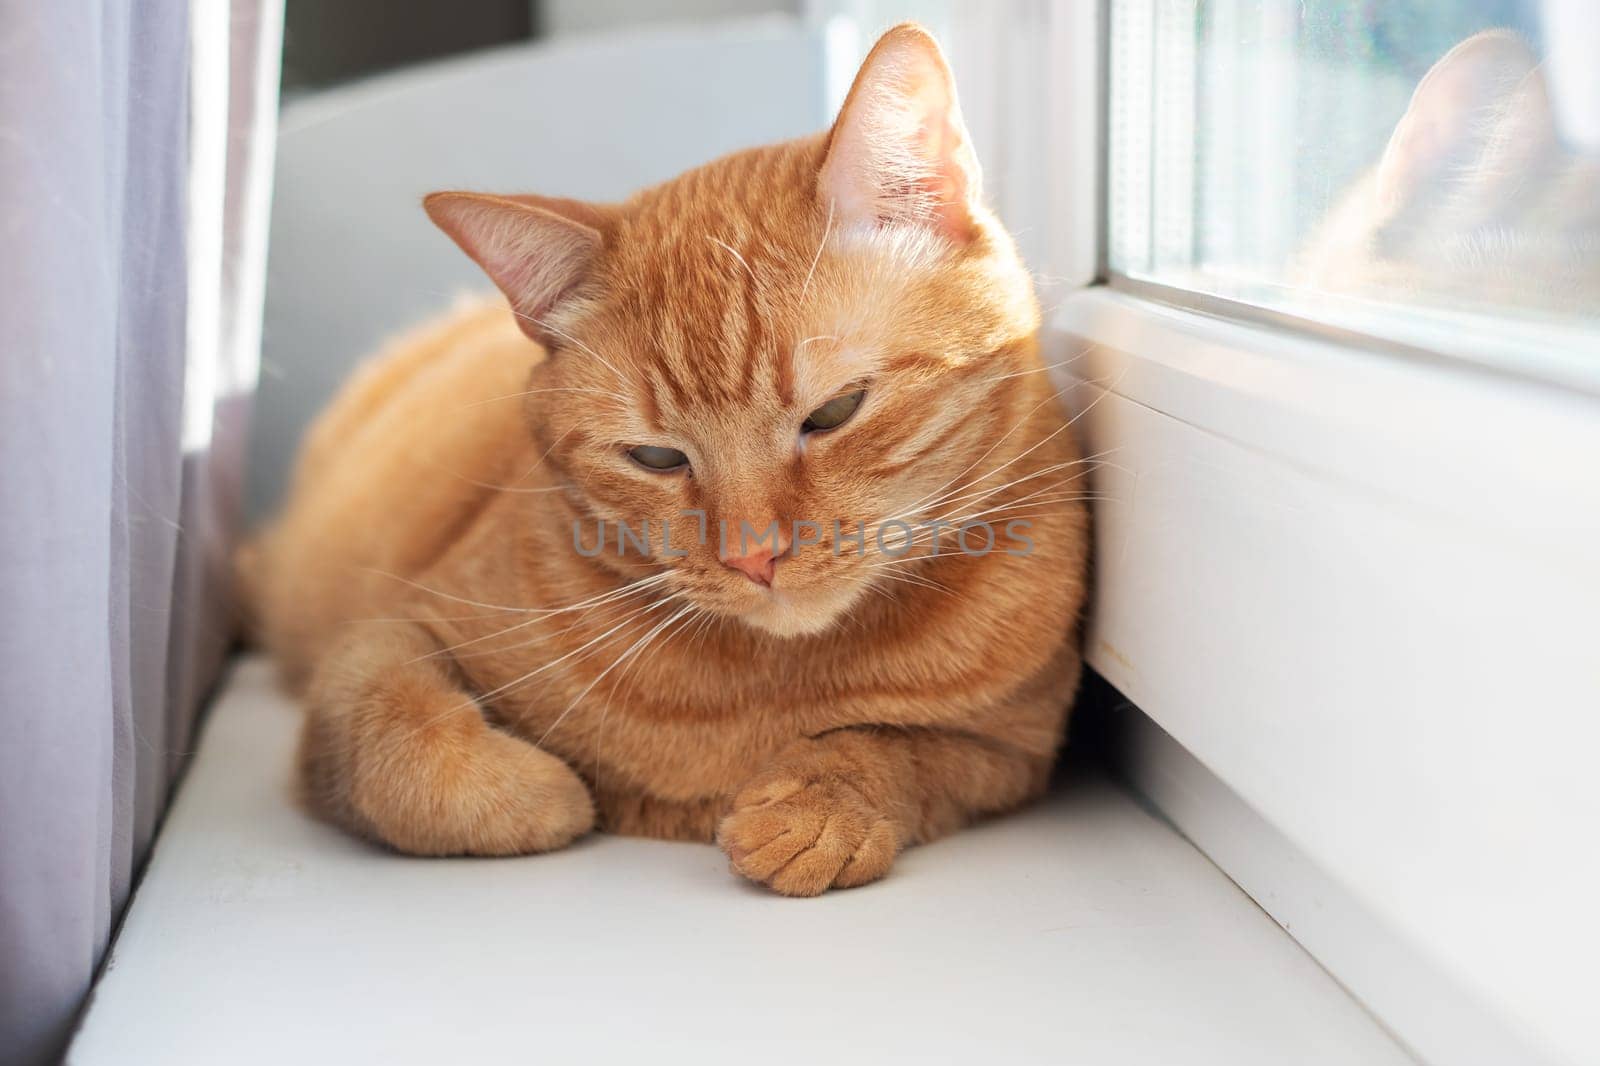 A small to mediumsized Felidae, the orange cat with fawn fur is laying on a window sill, gazing out the window with its whiskers twitching in comfort